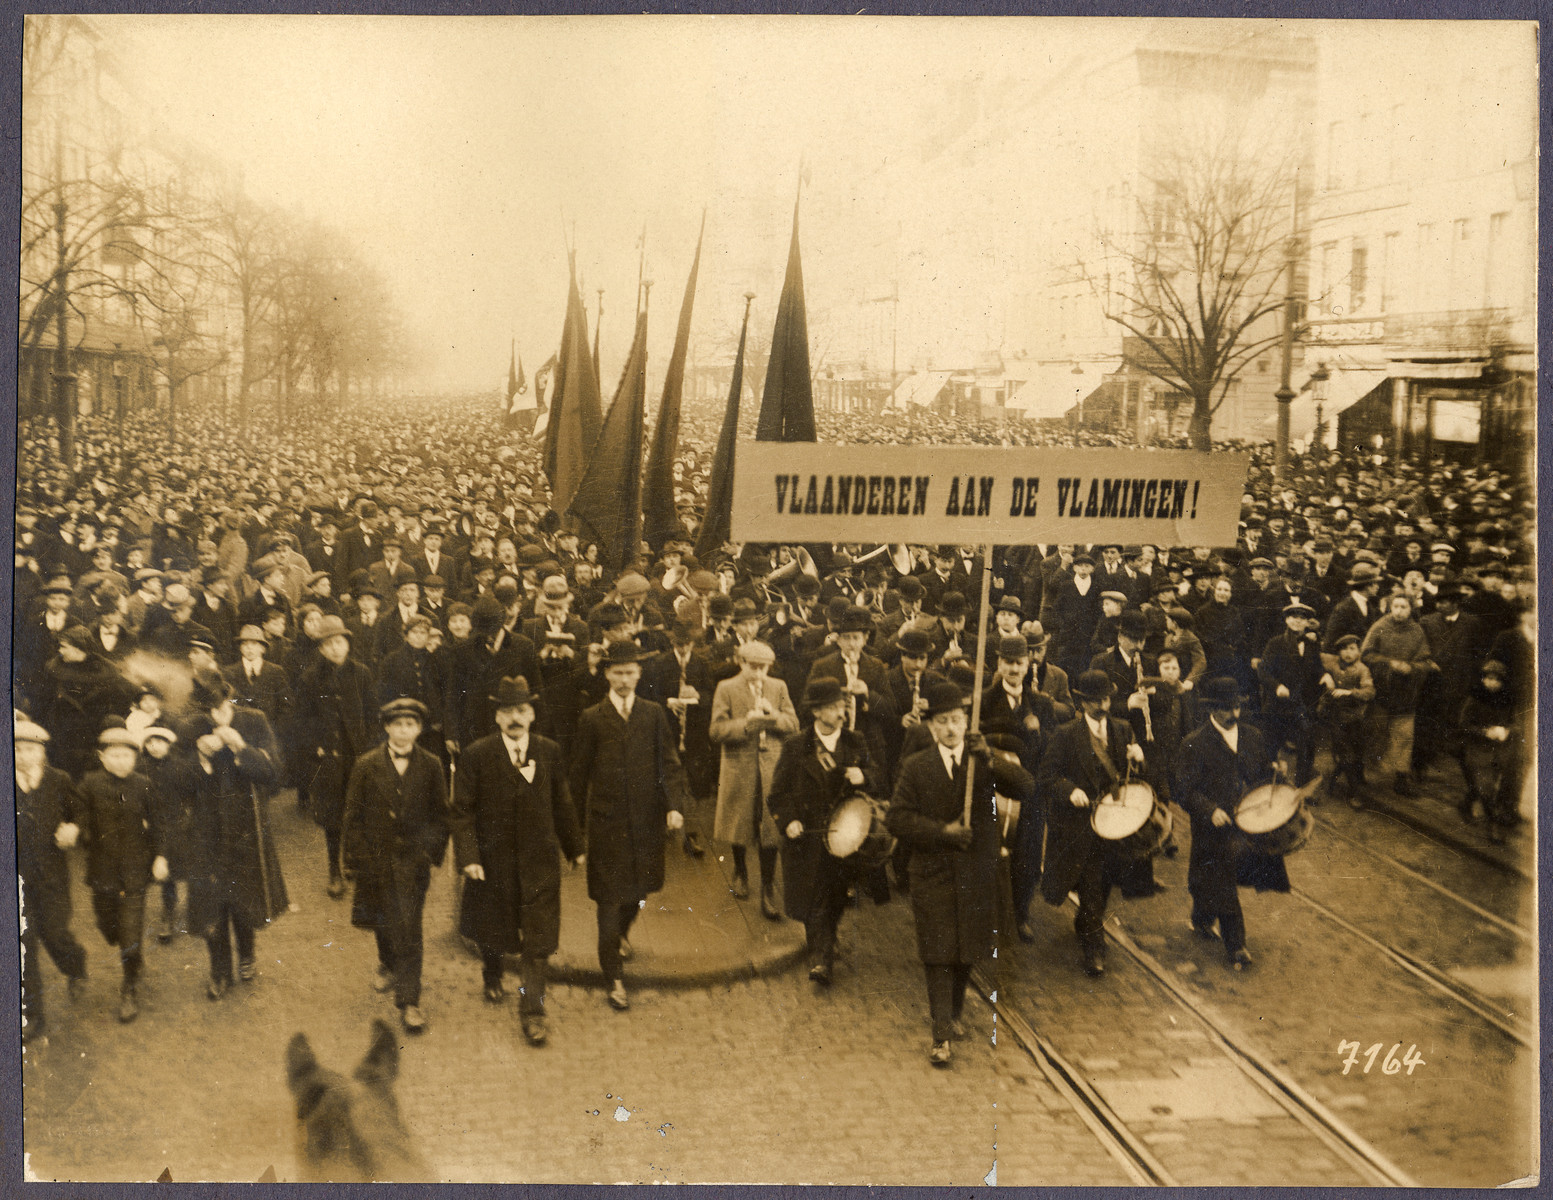 A large crowd parades through a city street carrying a sign the reads: Vlaanderen and de Vlamigen (Flanders for the Flemish).